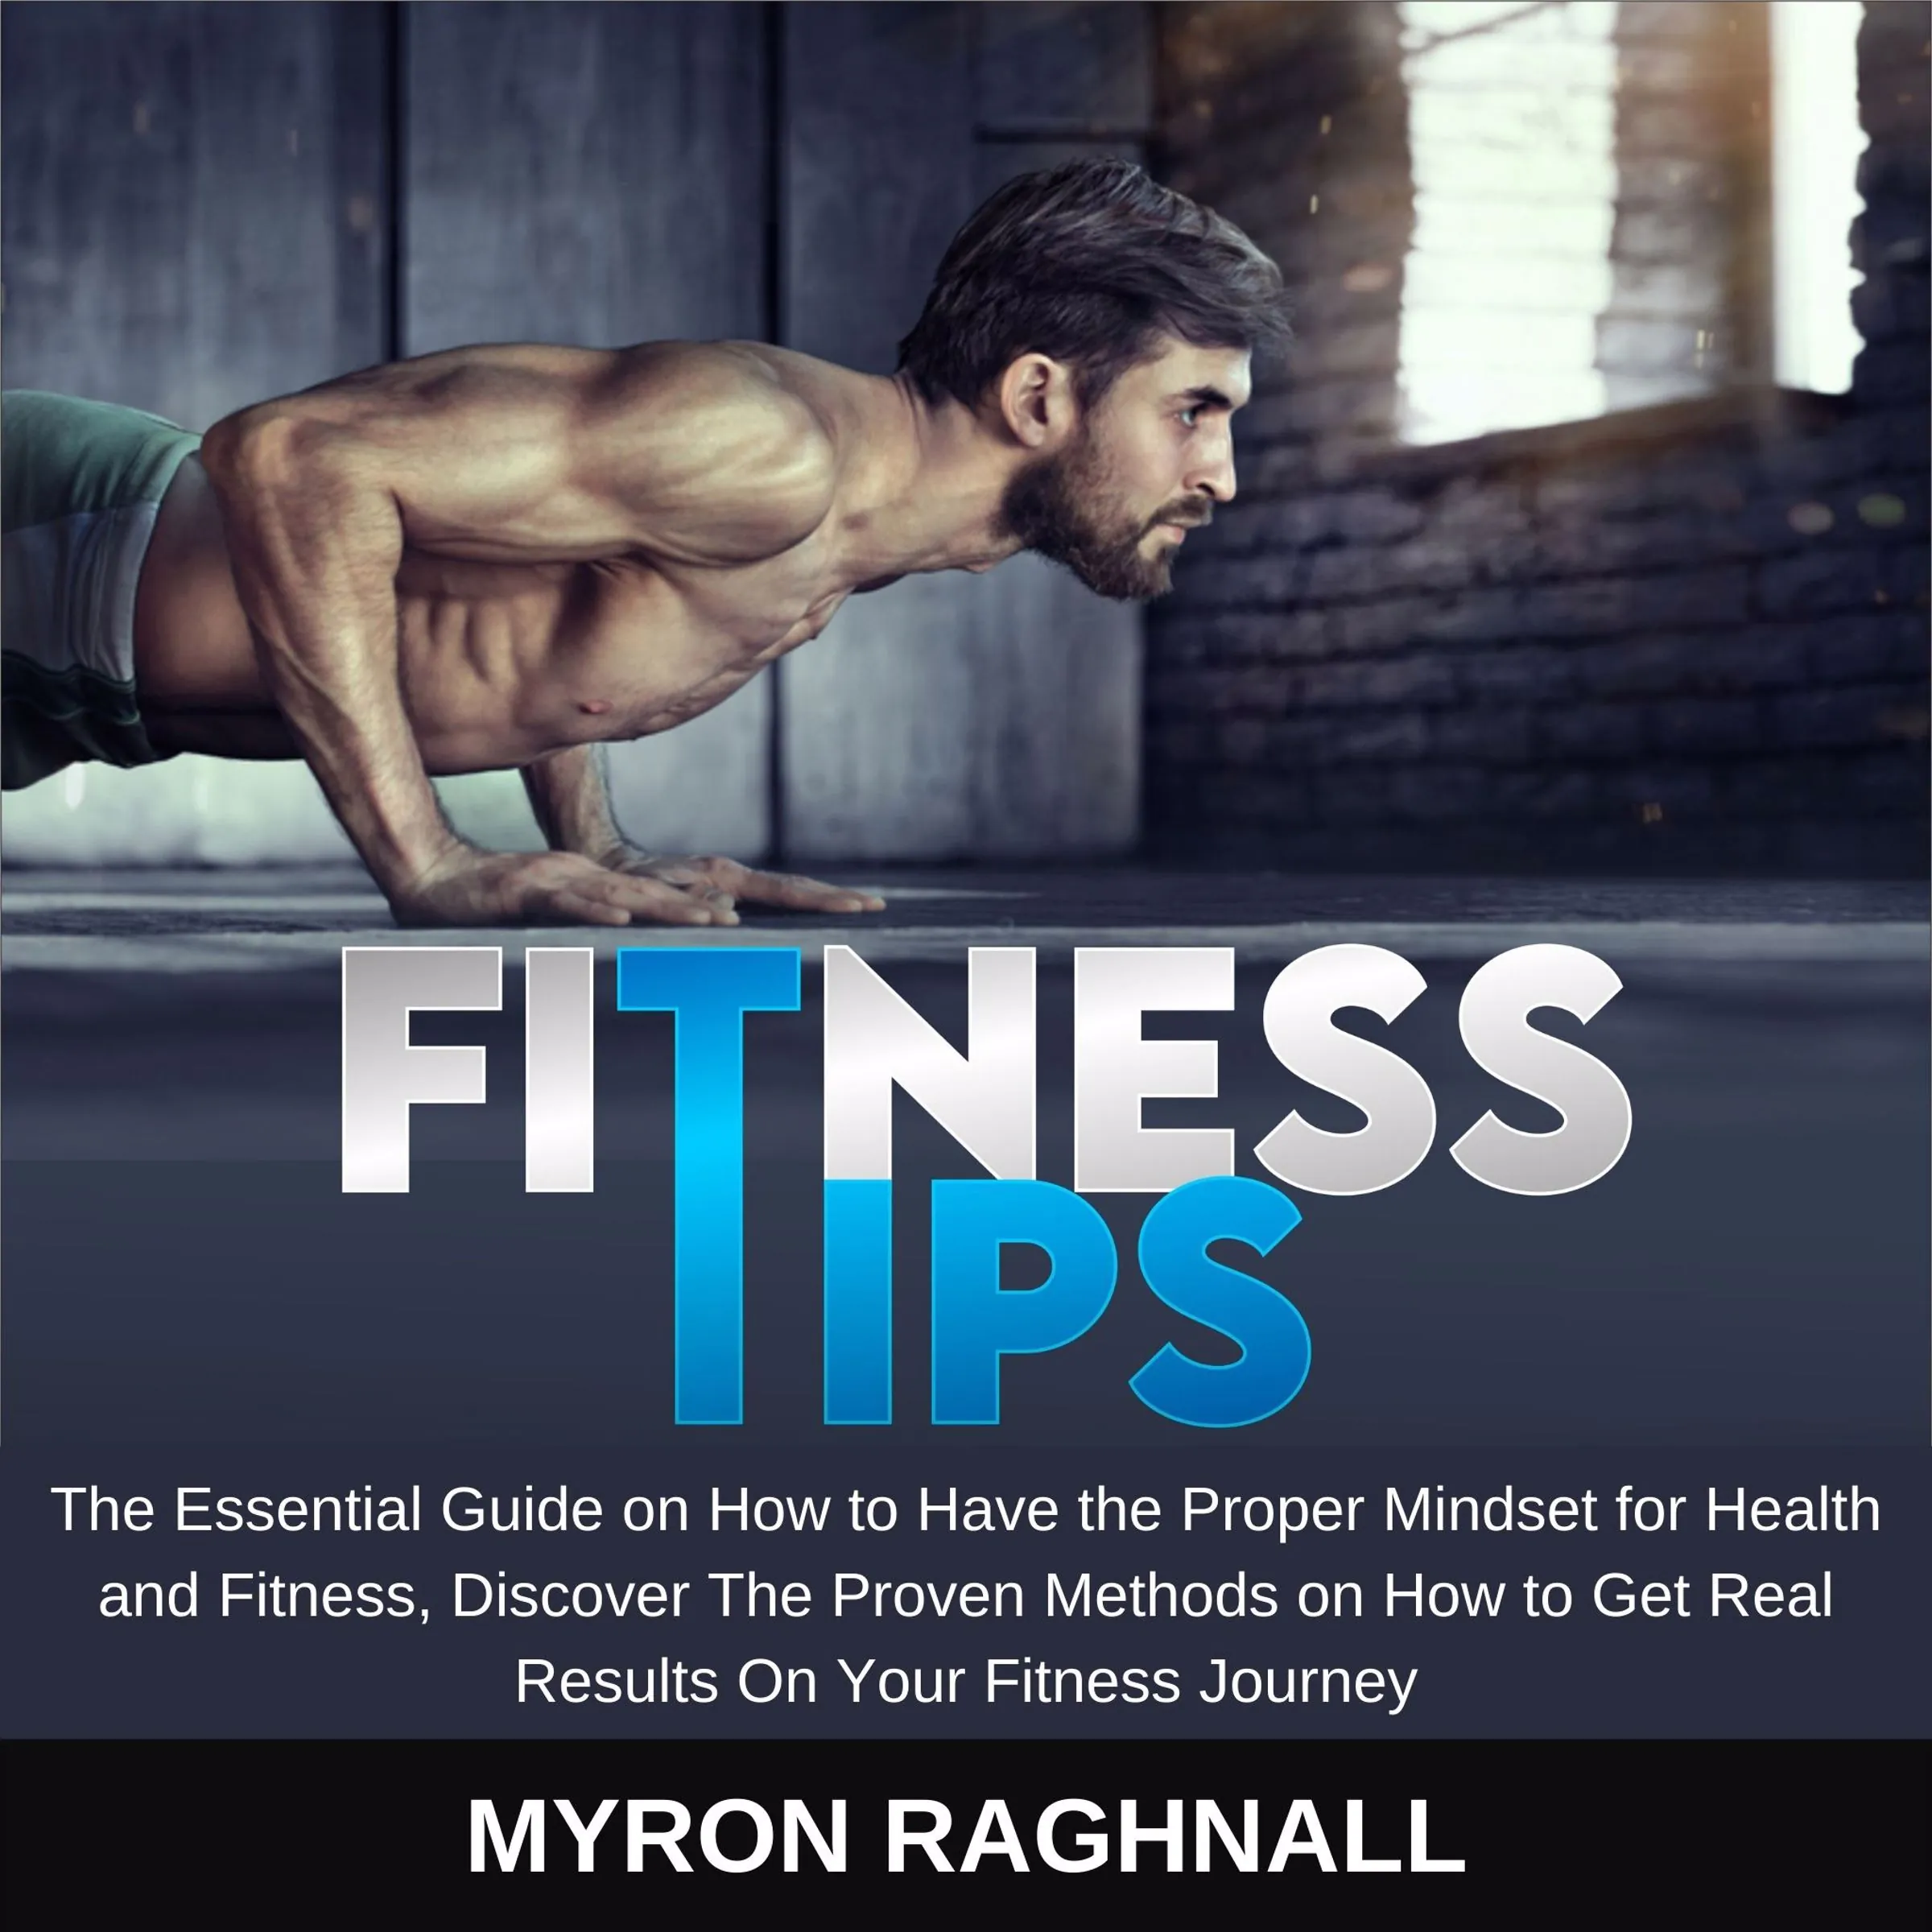 Fitness Tips by Myron Raghnall Audiobook